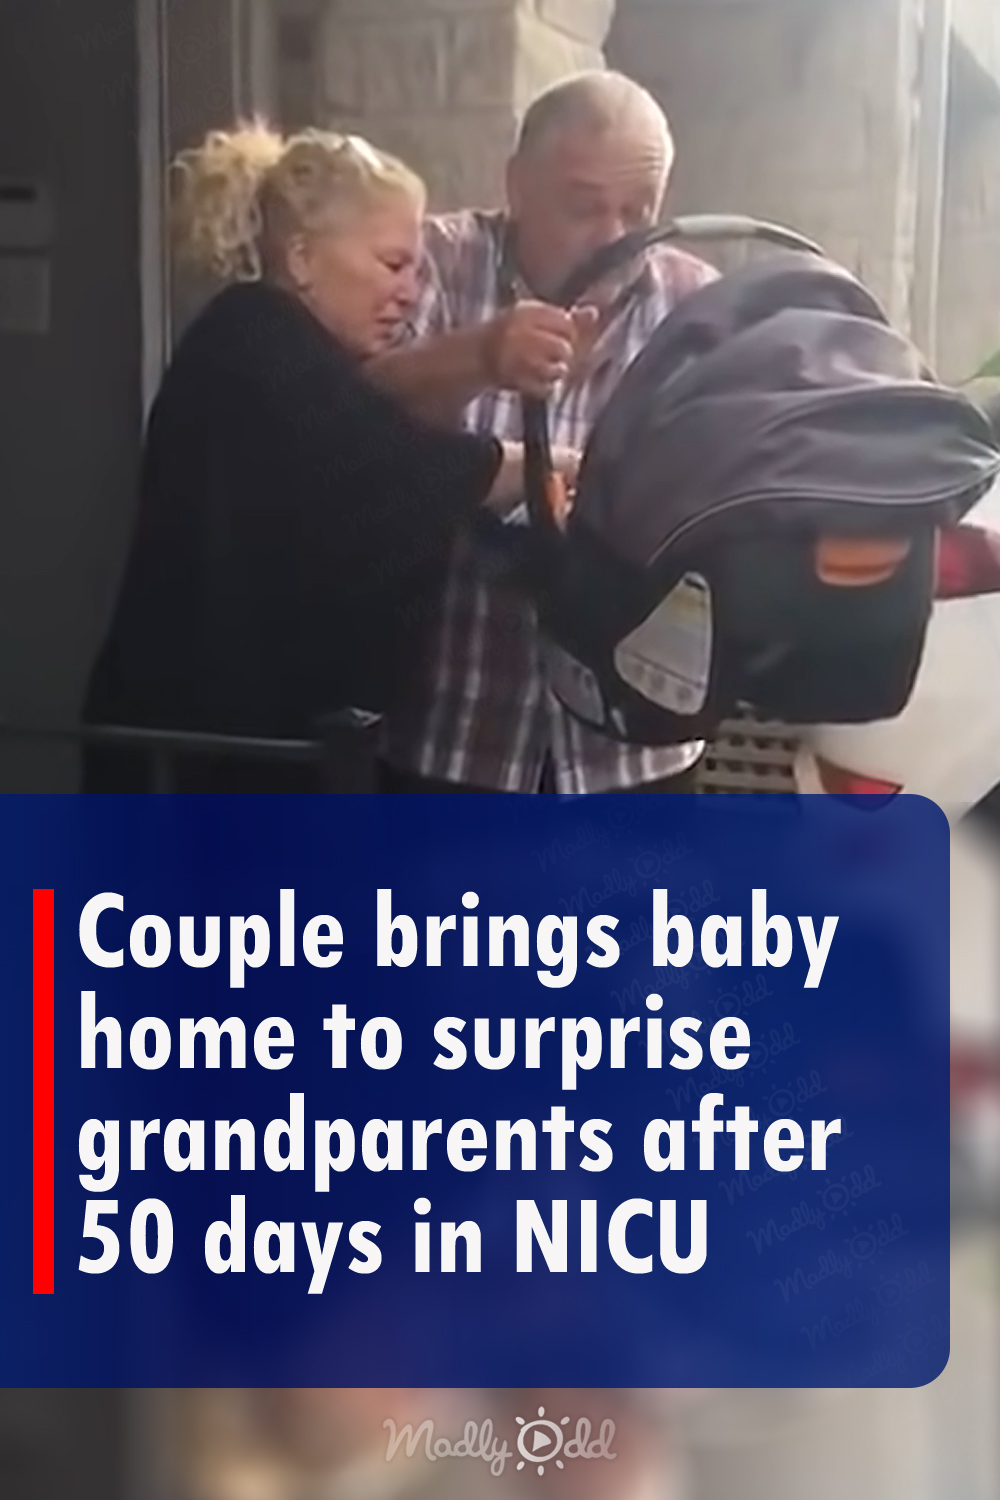 Couple brings baby home to surprise grandparents after 50 days in NICU